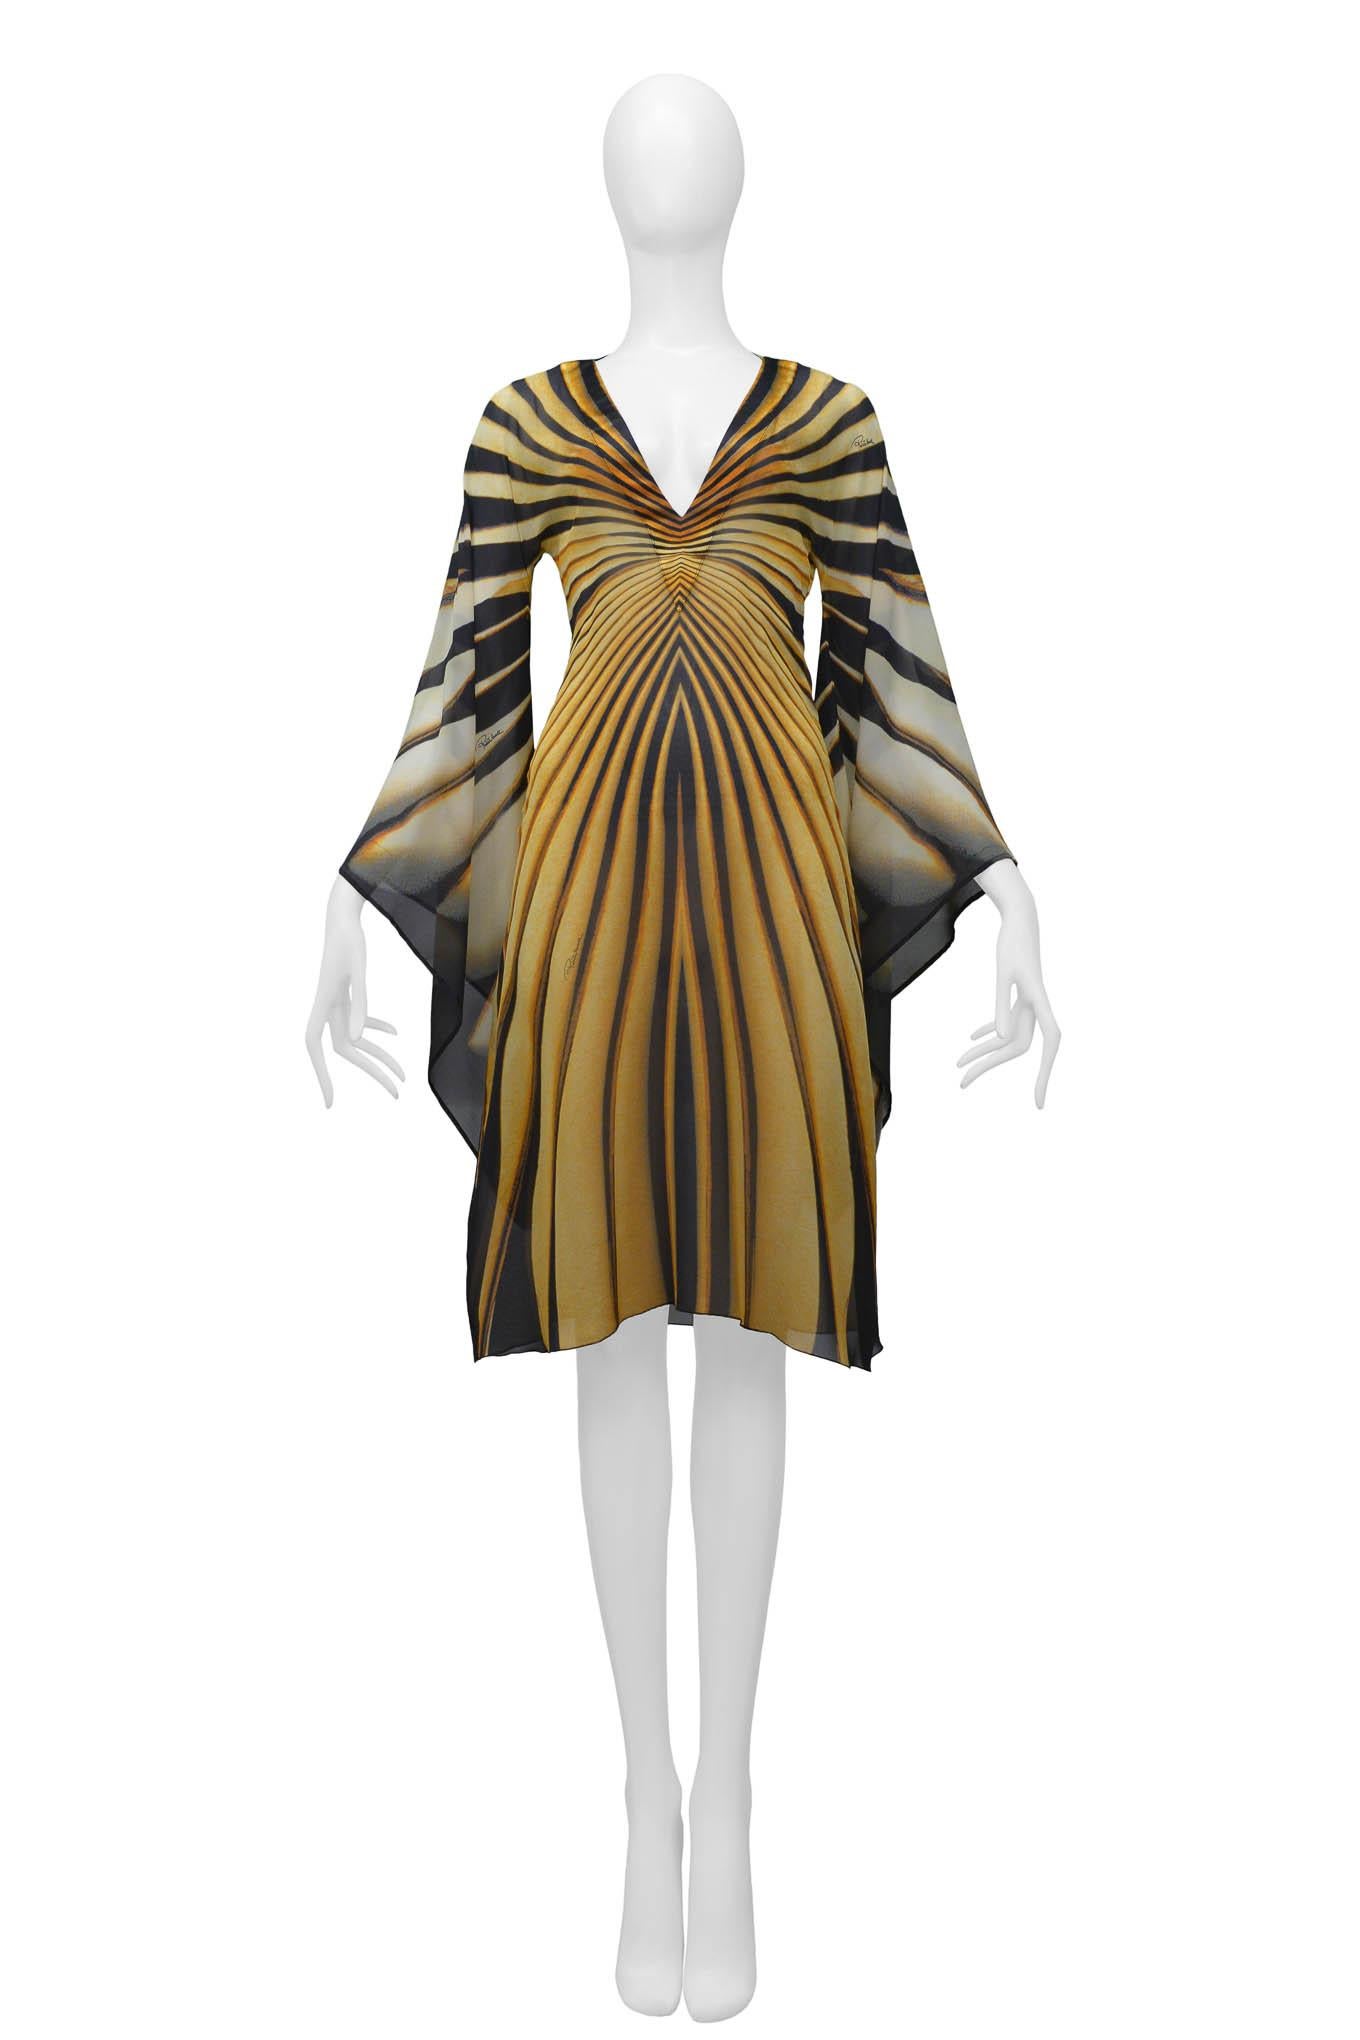 Resurrection Vintage is excited to present a vintage Roberto Cavalli yellow monarch butterfly dress gown featuring a v-neck along the front and back, a tie at the back of the neck, and bell sleeves that replicate the wings of the monarch